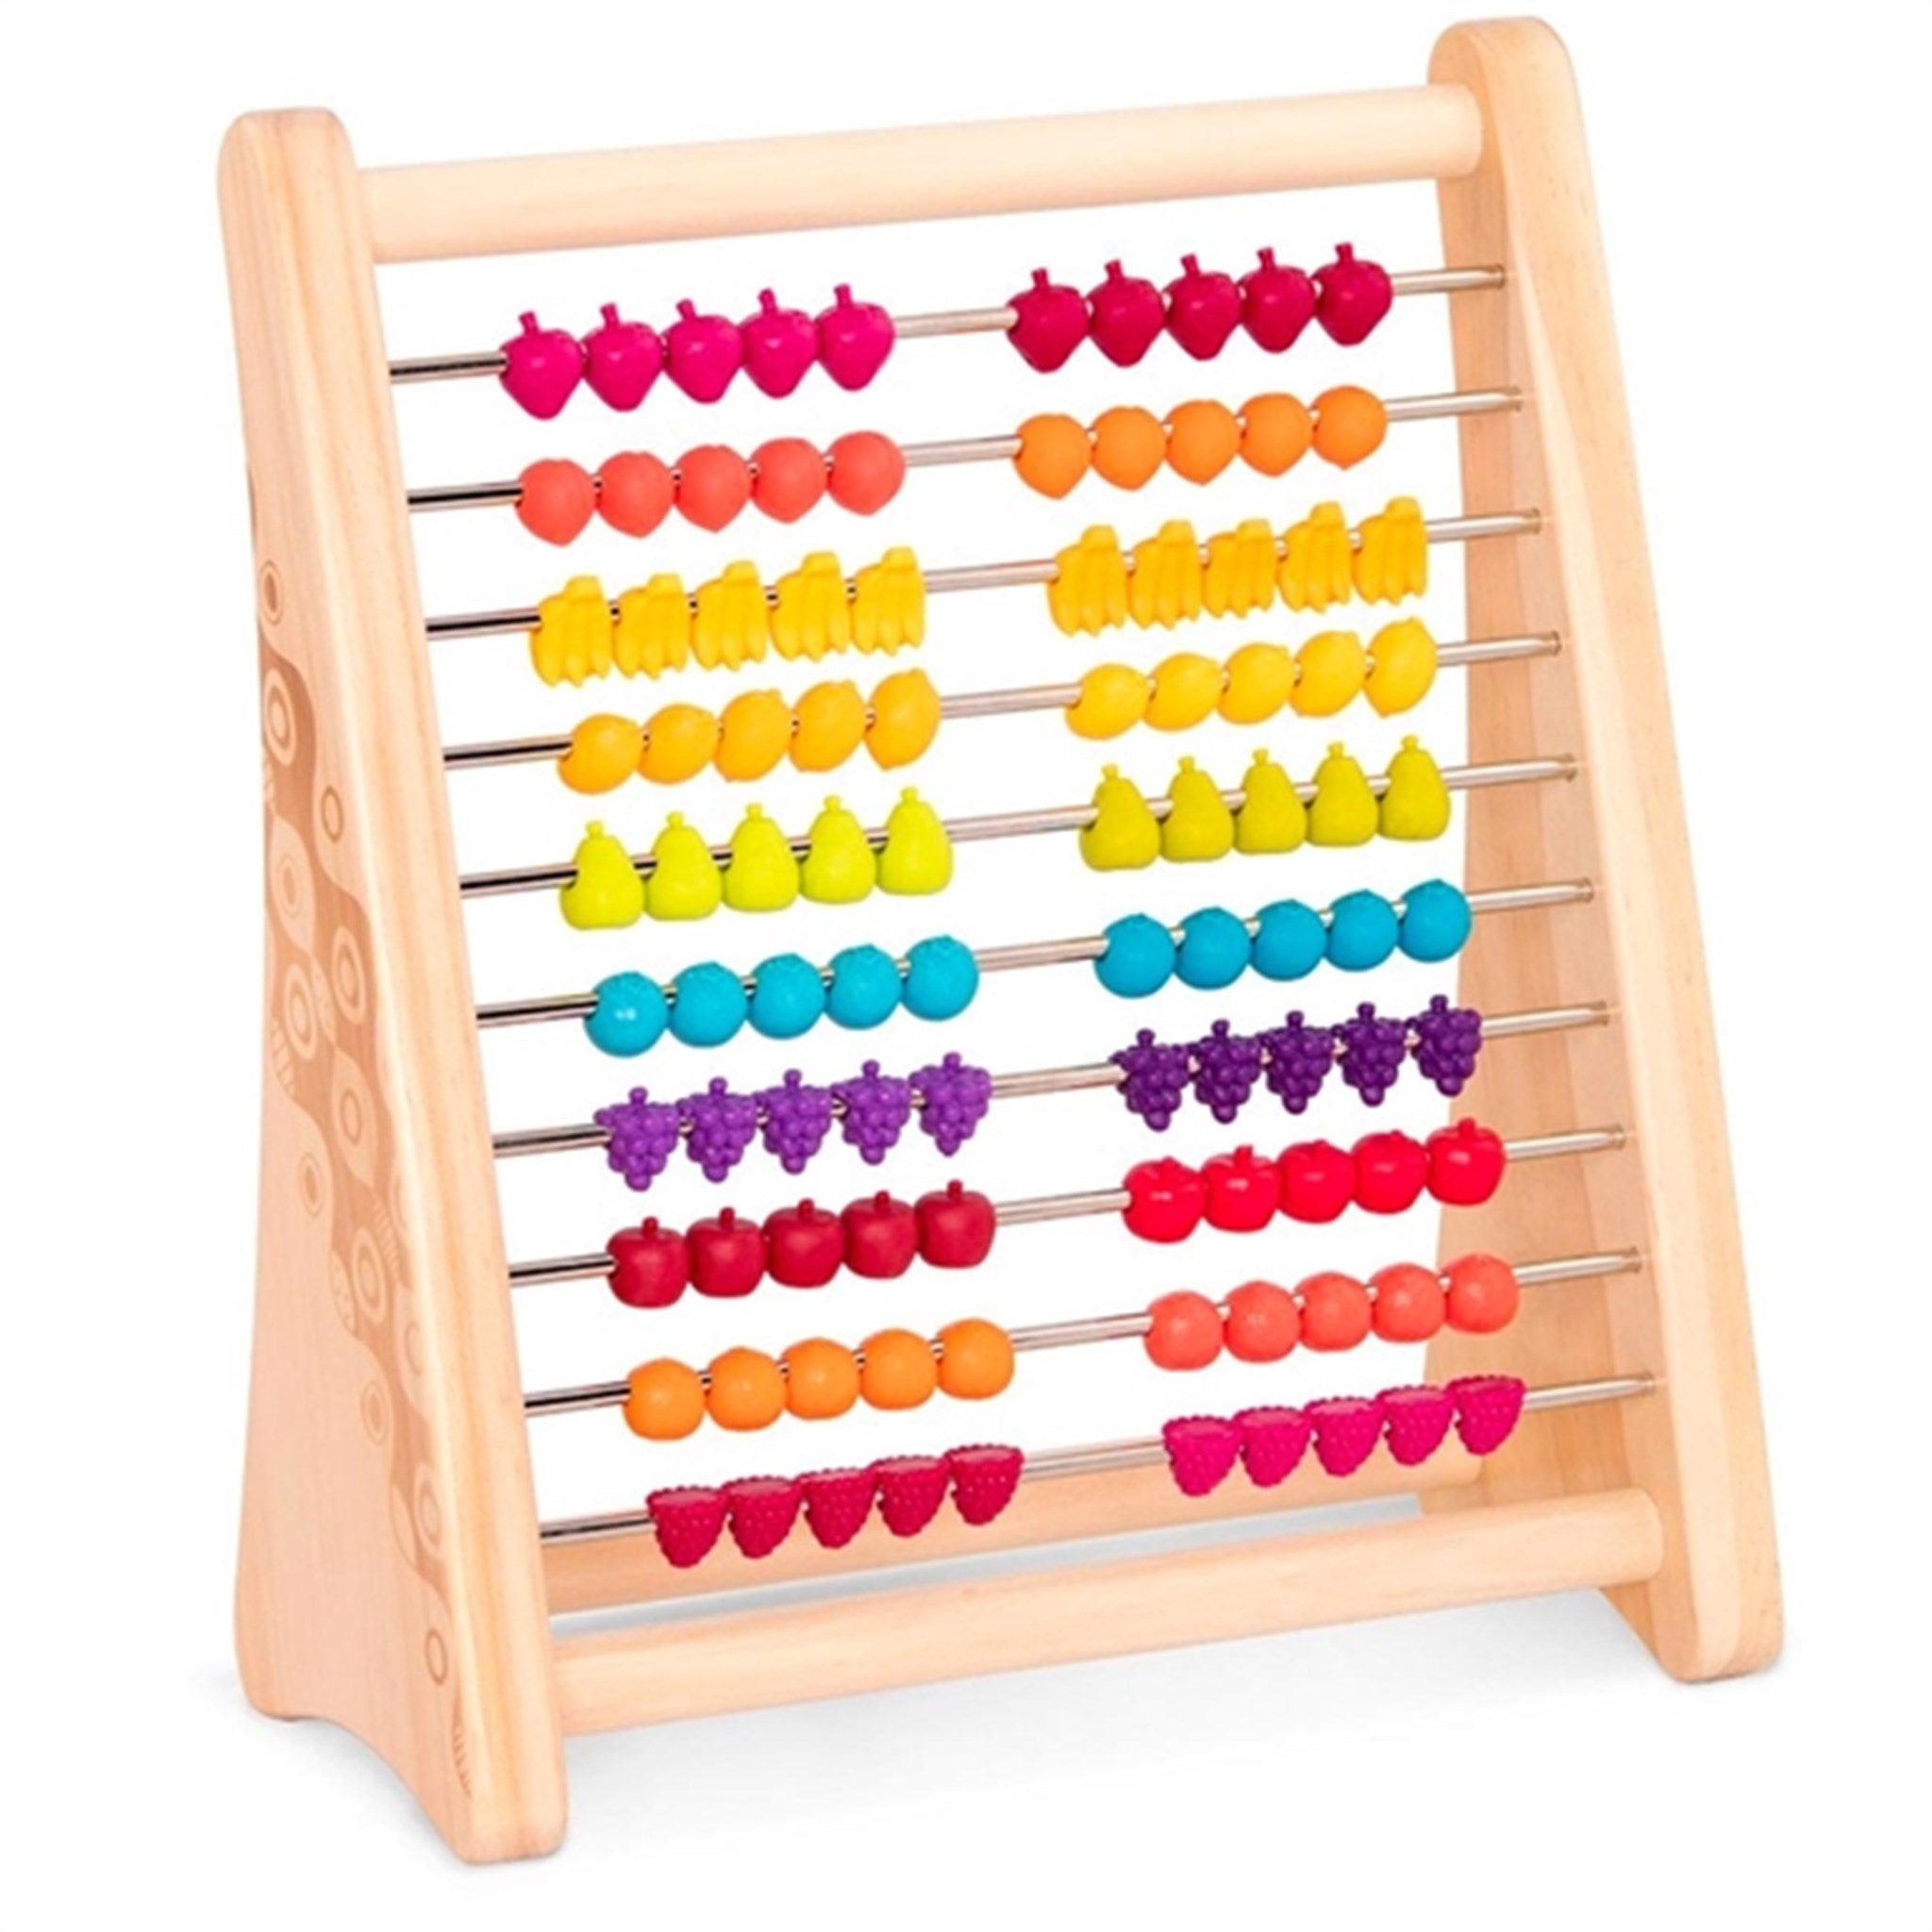 B-toys Two-ty Fruity Abacus